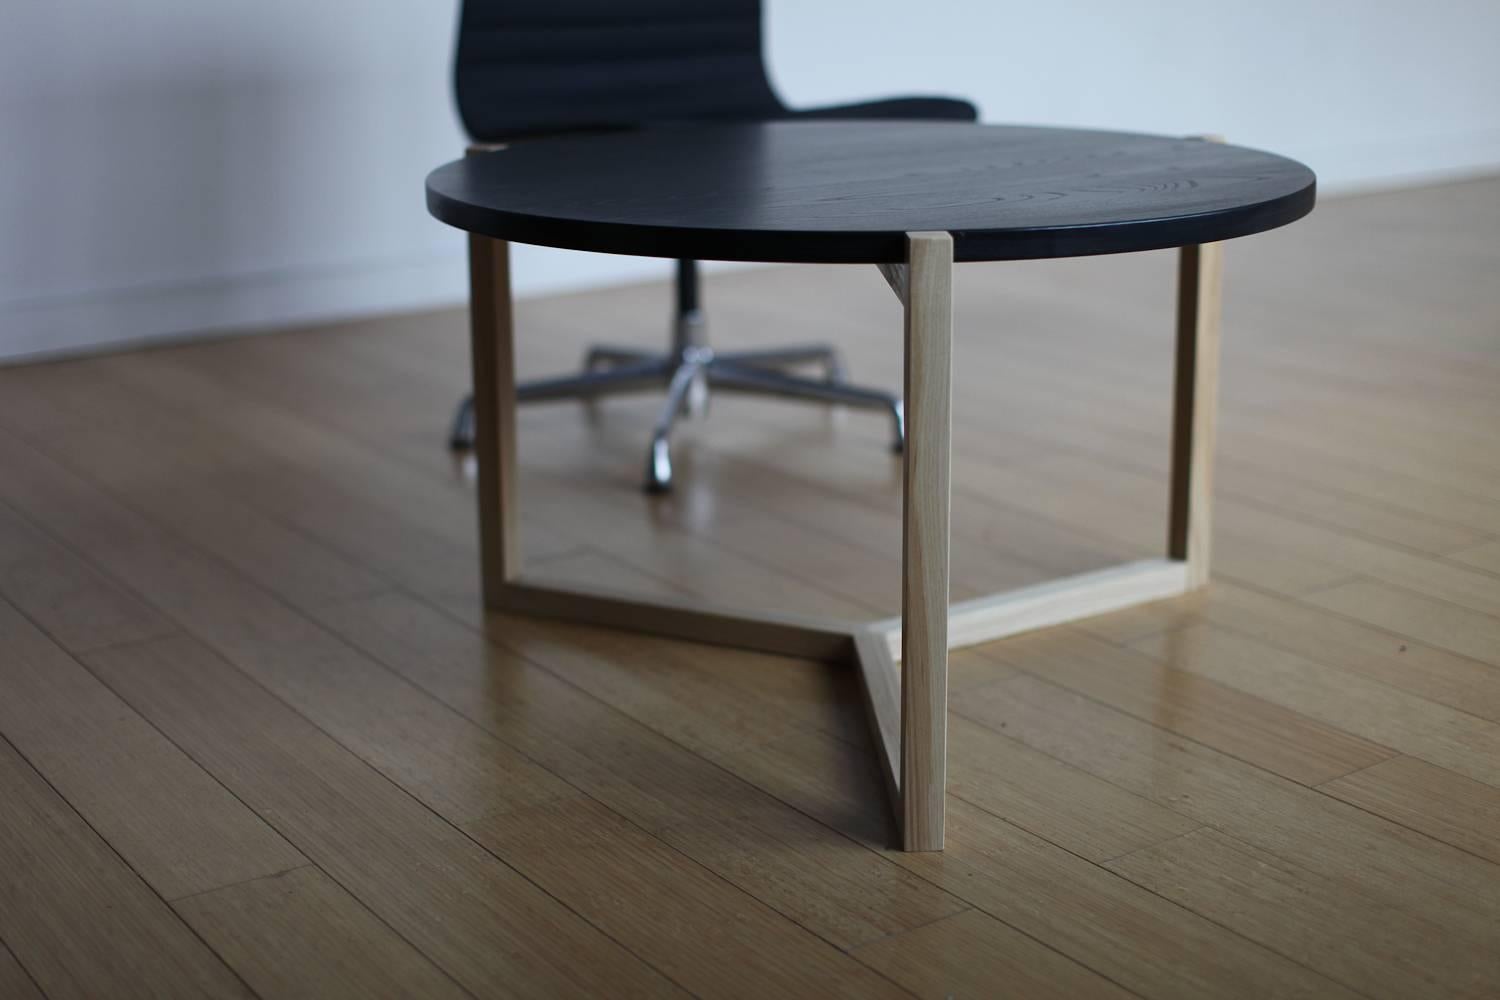 The Felix coffee table is built in our Brooklyn studio using premium hardwoods. The three legged design showcases a unique Silhouette from any angle, and the three way miter joint provides a functional detail at the base.

Made of solid wood, hand